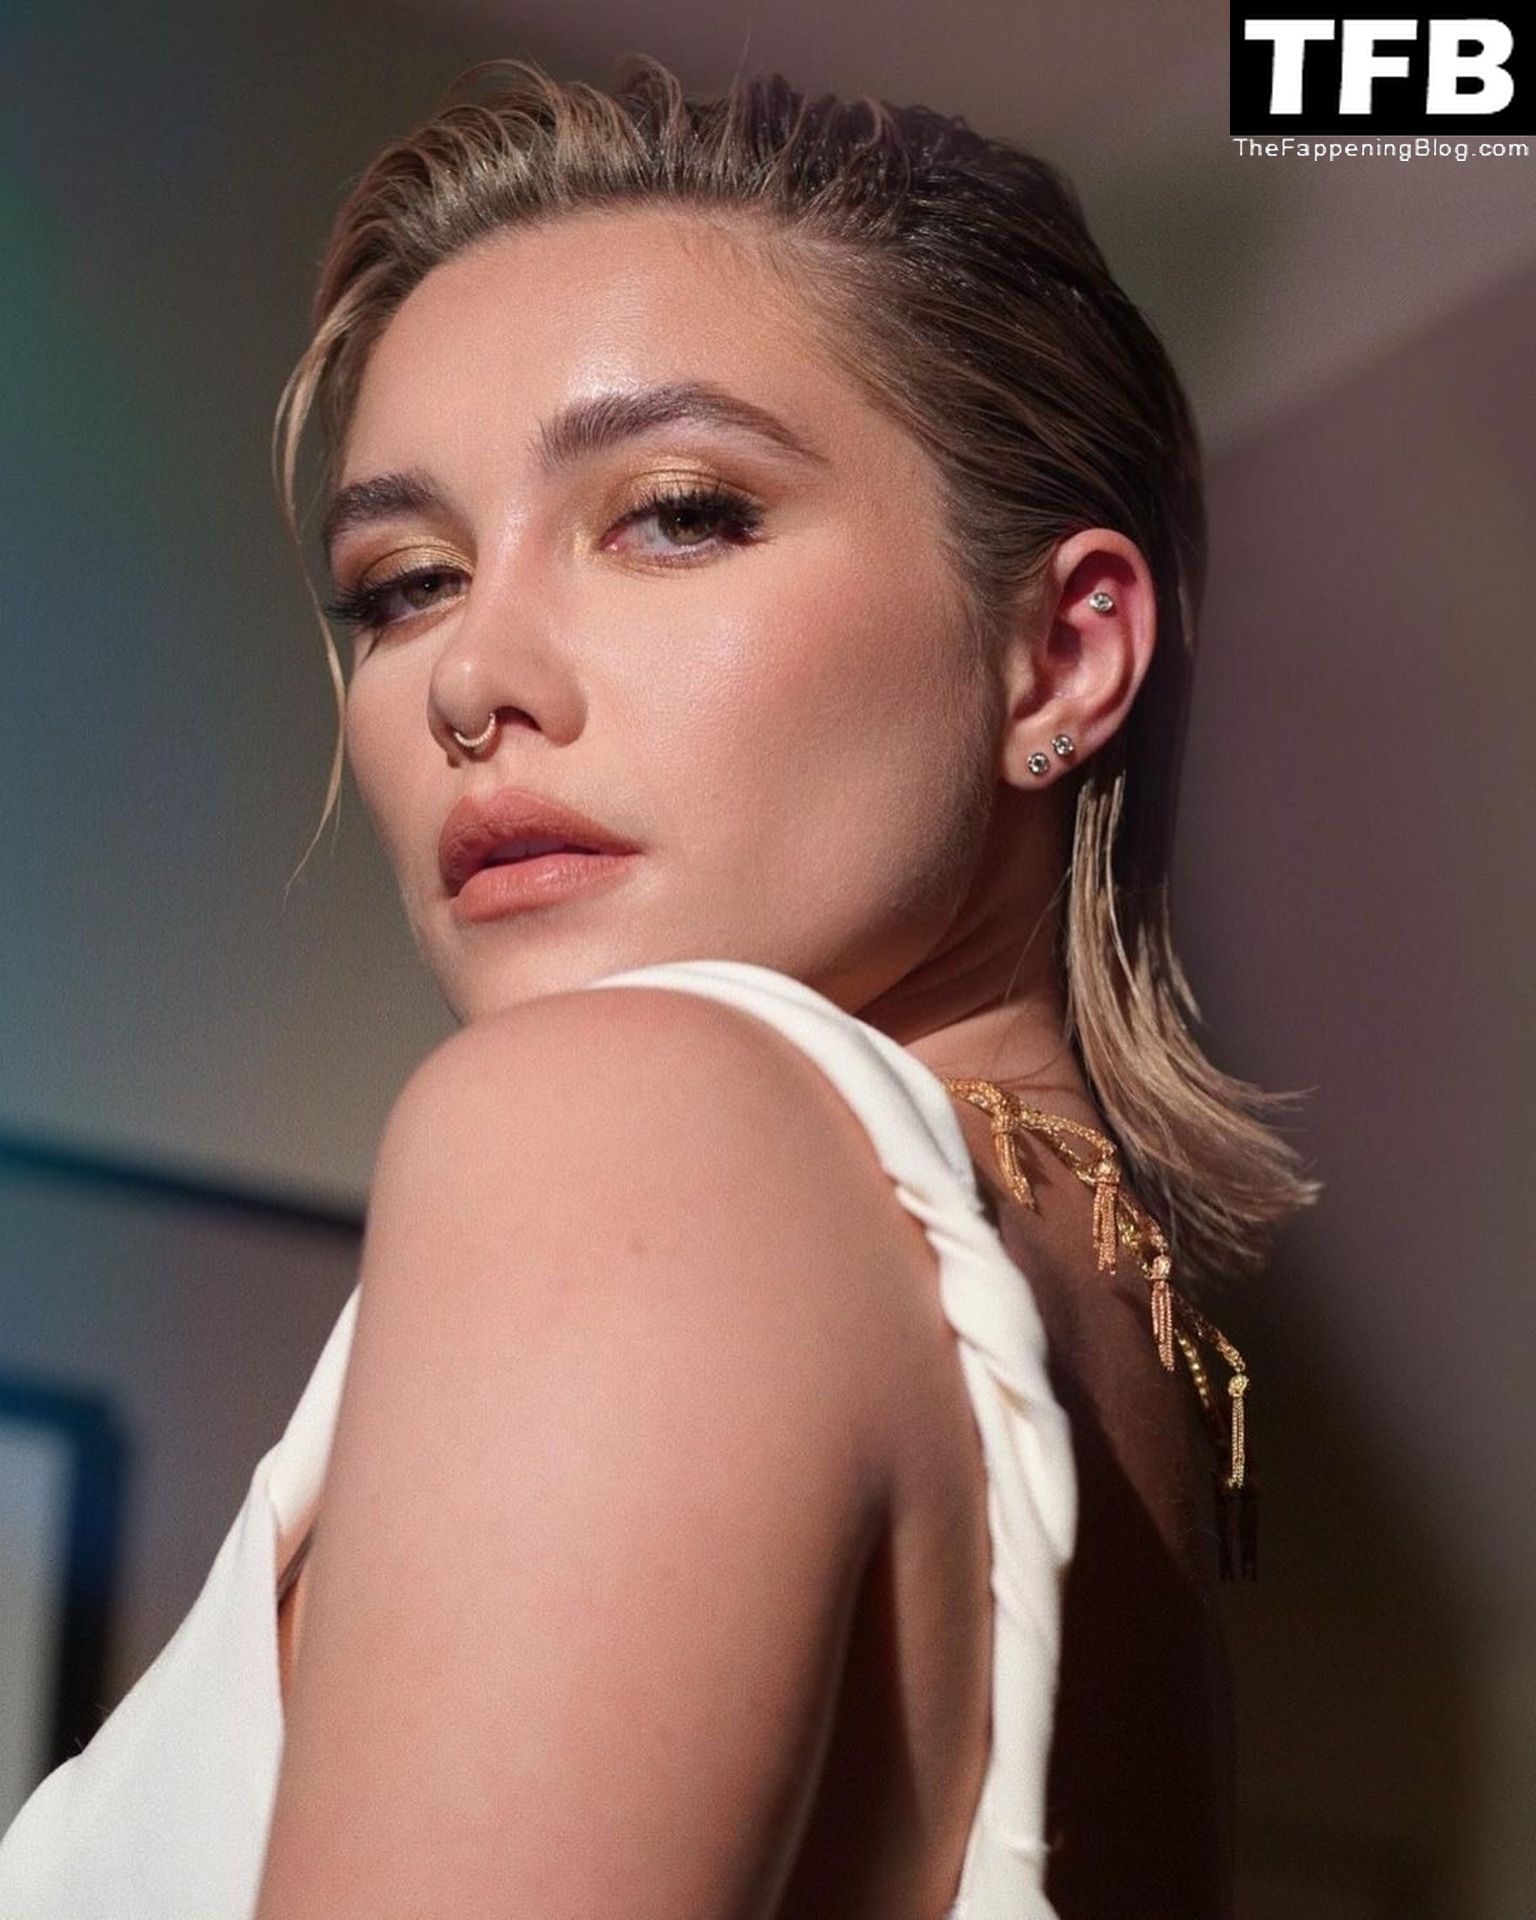 Florence-Pugh-Sexy-The-Fappening-Blog-23-1.jpg